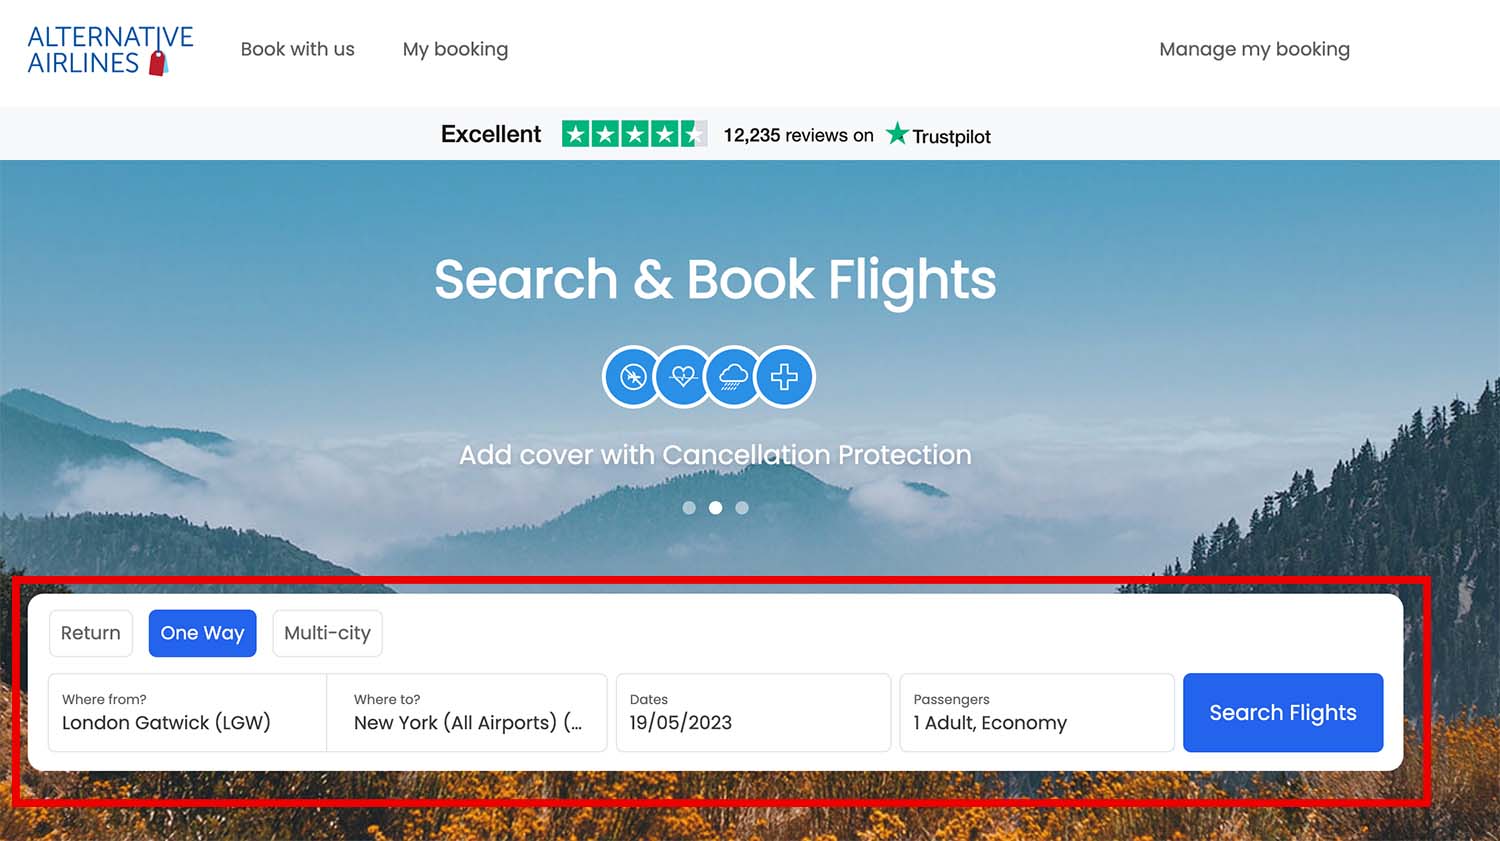 step 1 - search for flights in the search form